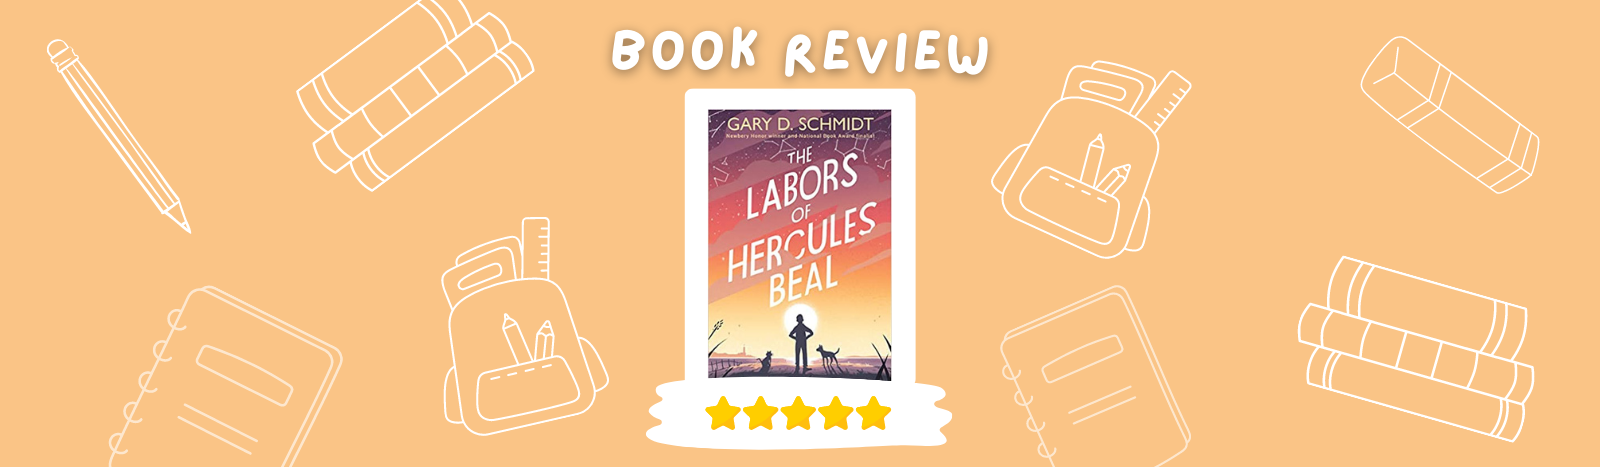 The Labors of Hercules Beal by Gary D. Schmidt – Book Review